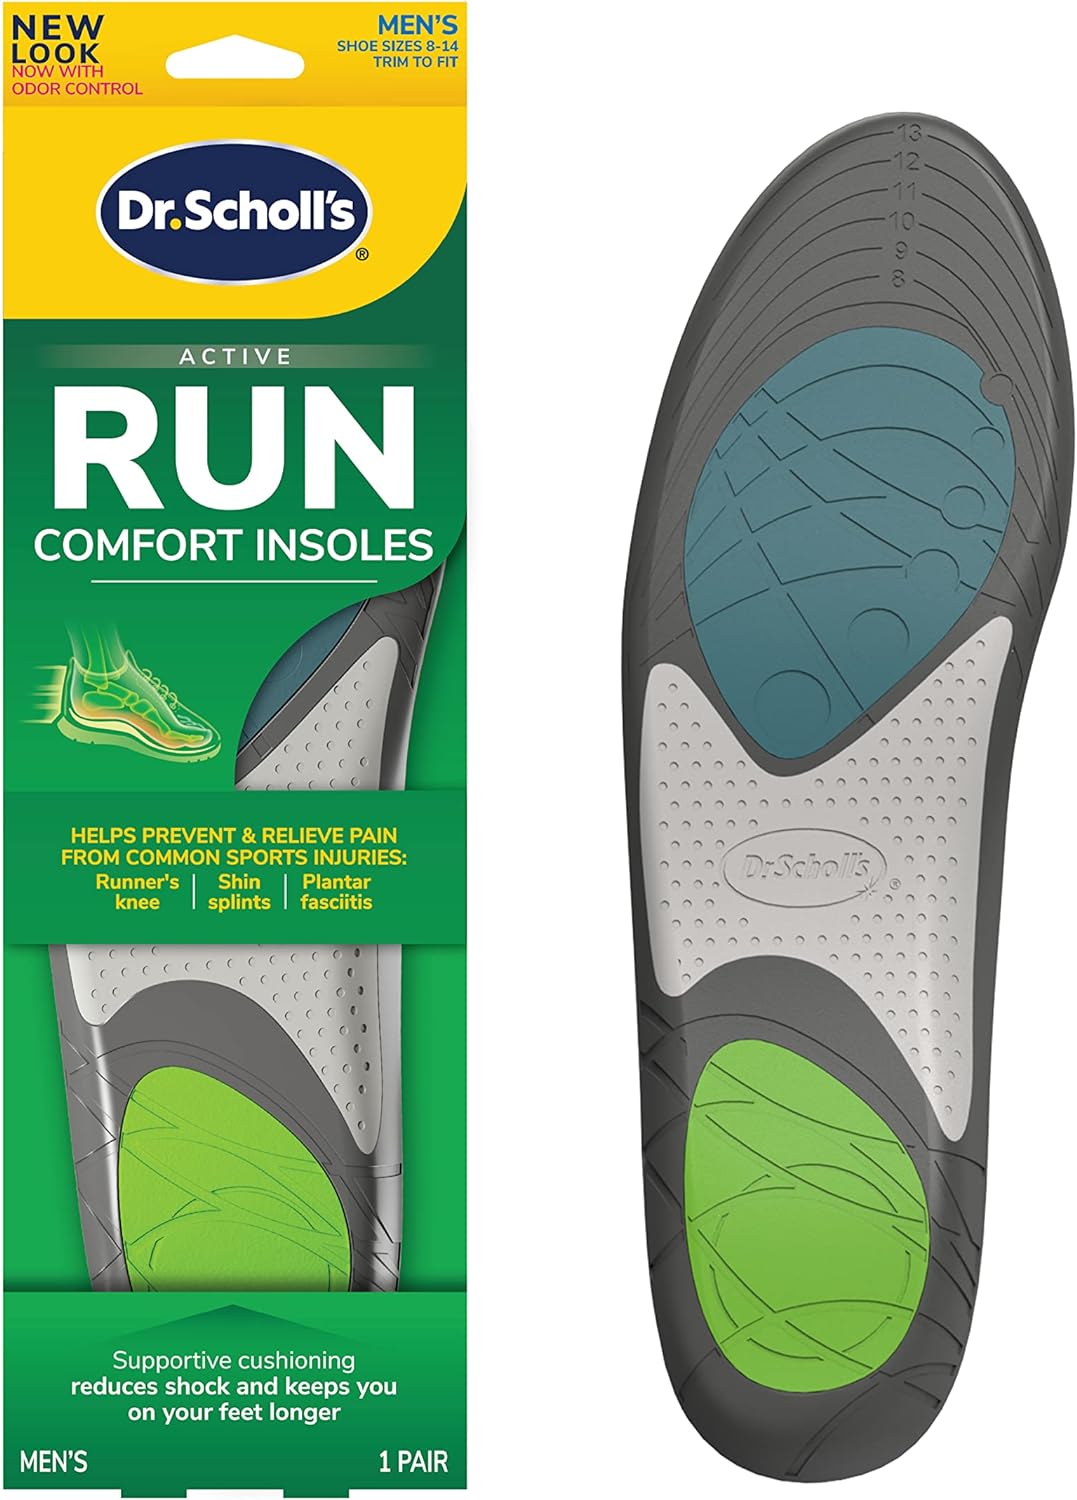 Dr. Scholls Run Active Comfort Insoles,Trim to Fit Inserts